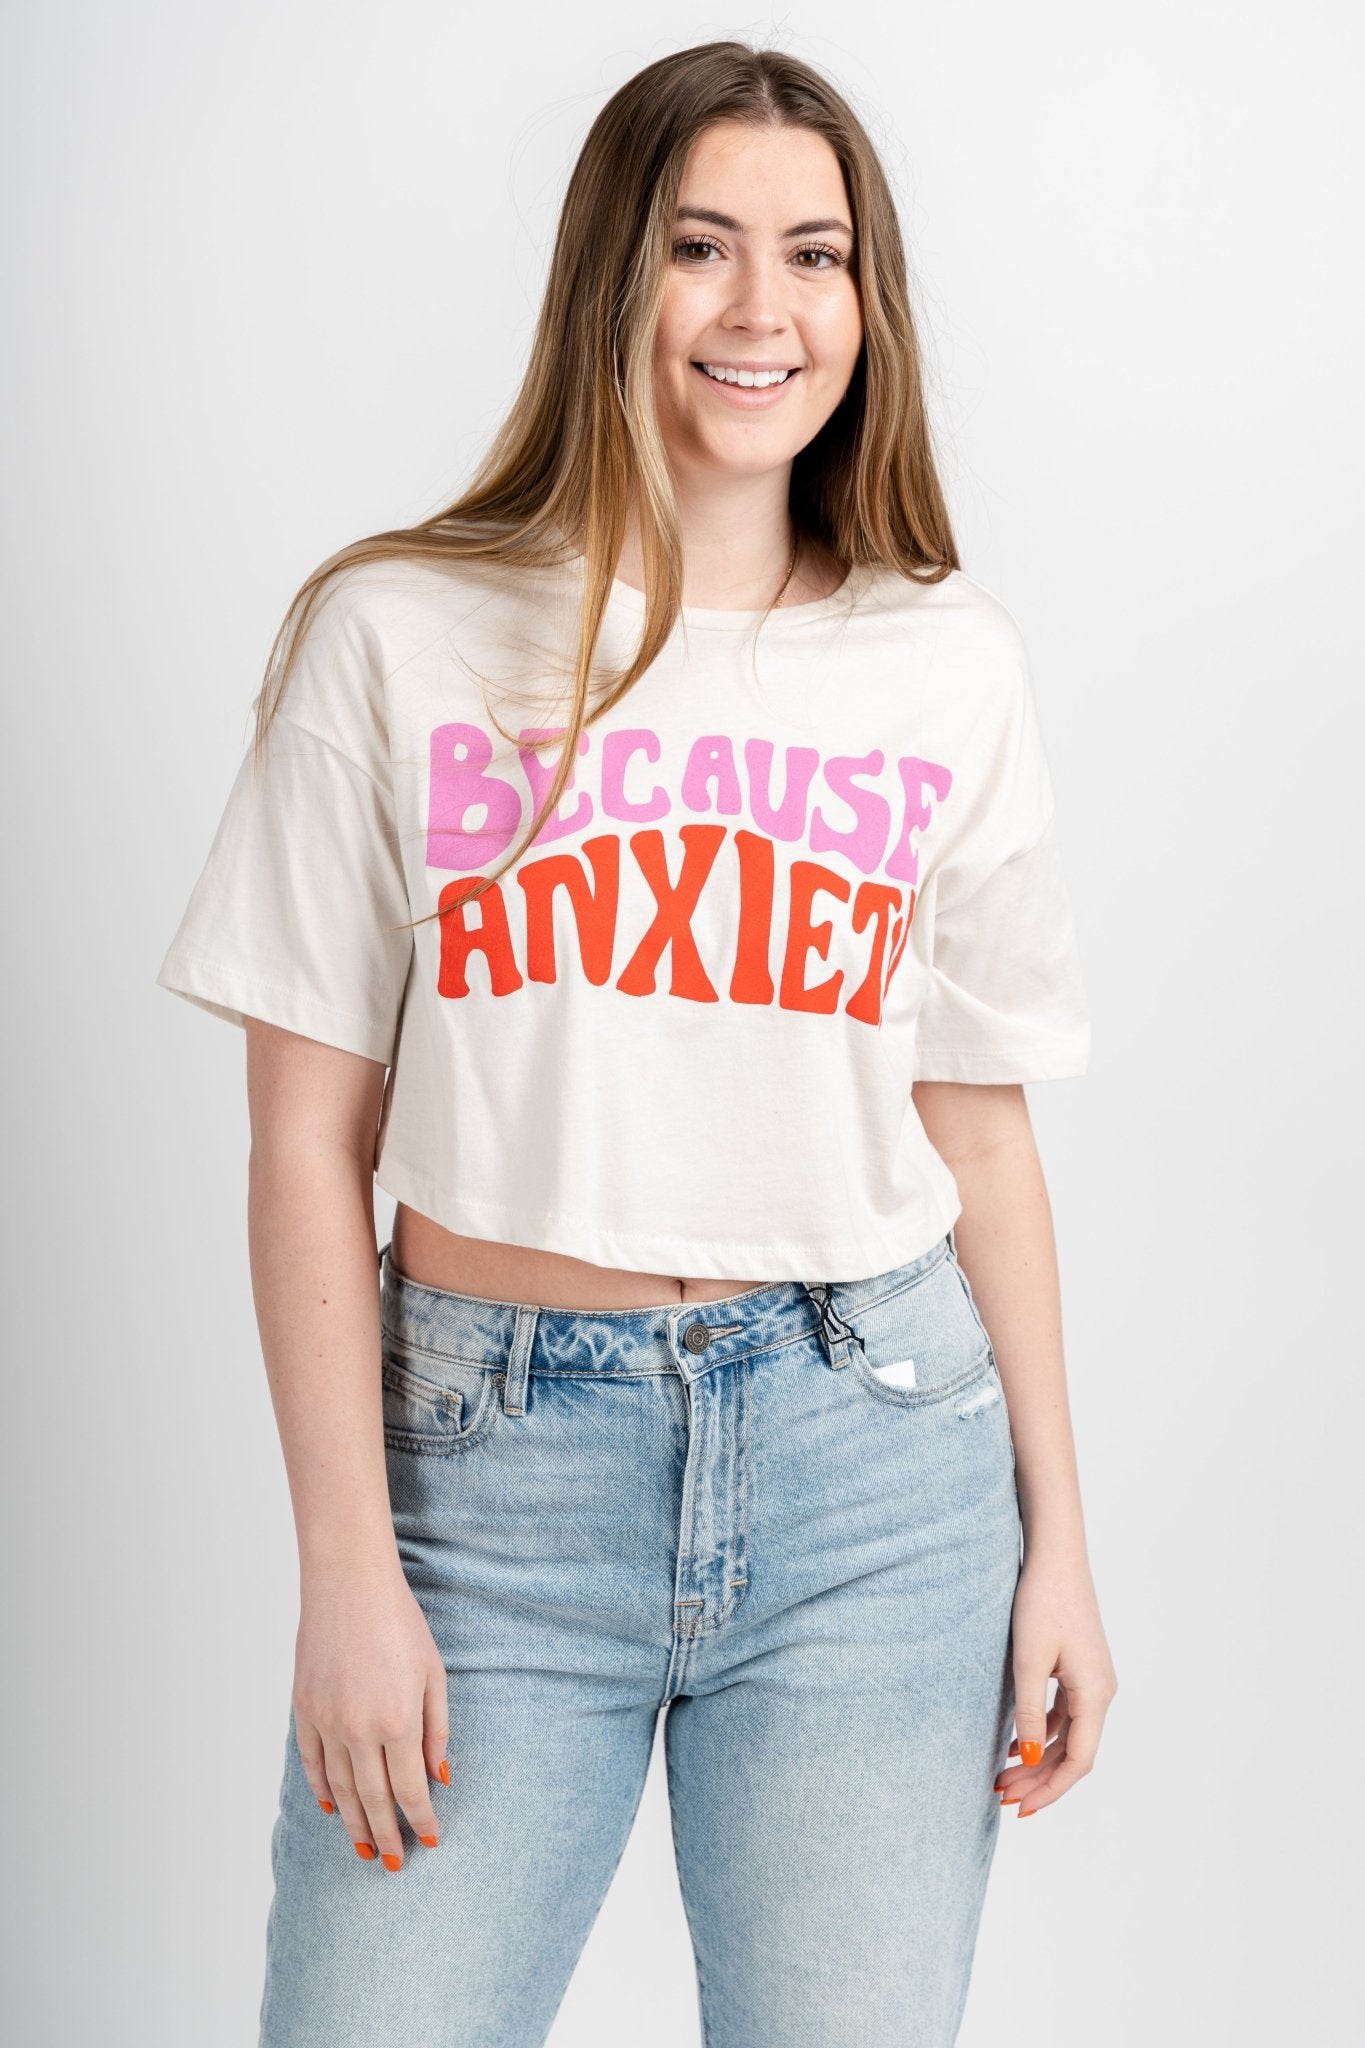 Because anxiety crop tee white - Stylish T-shirts - Trendy Graphic T-Shirts and Tank Tops at Lush Fashion Lounge Boutique in Oklahoma City